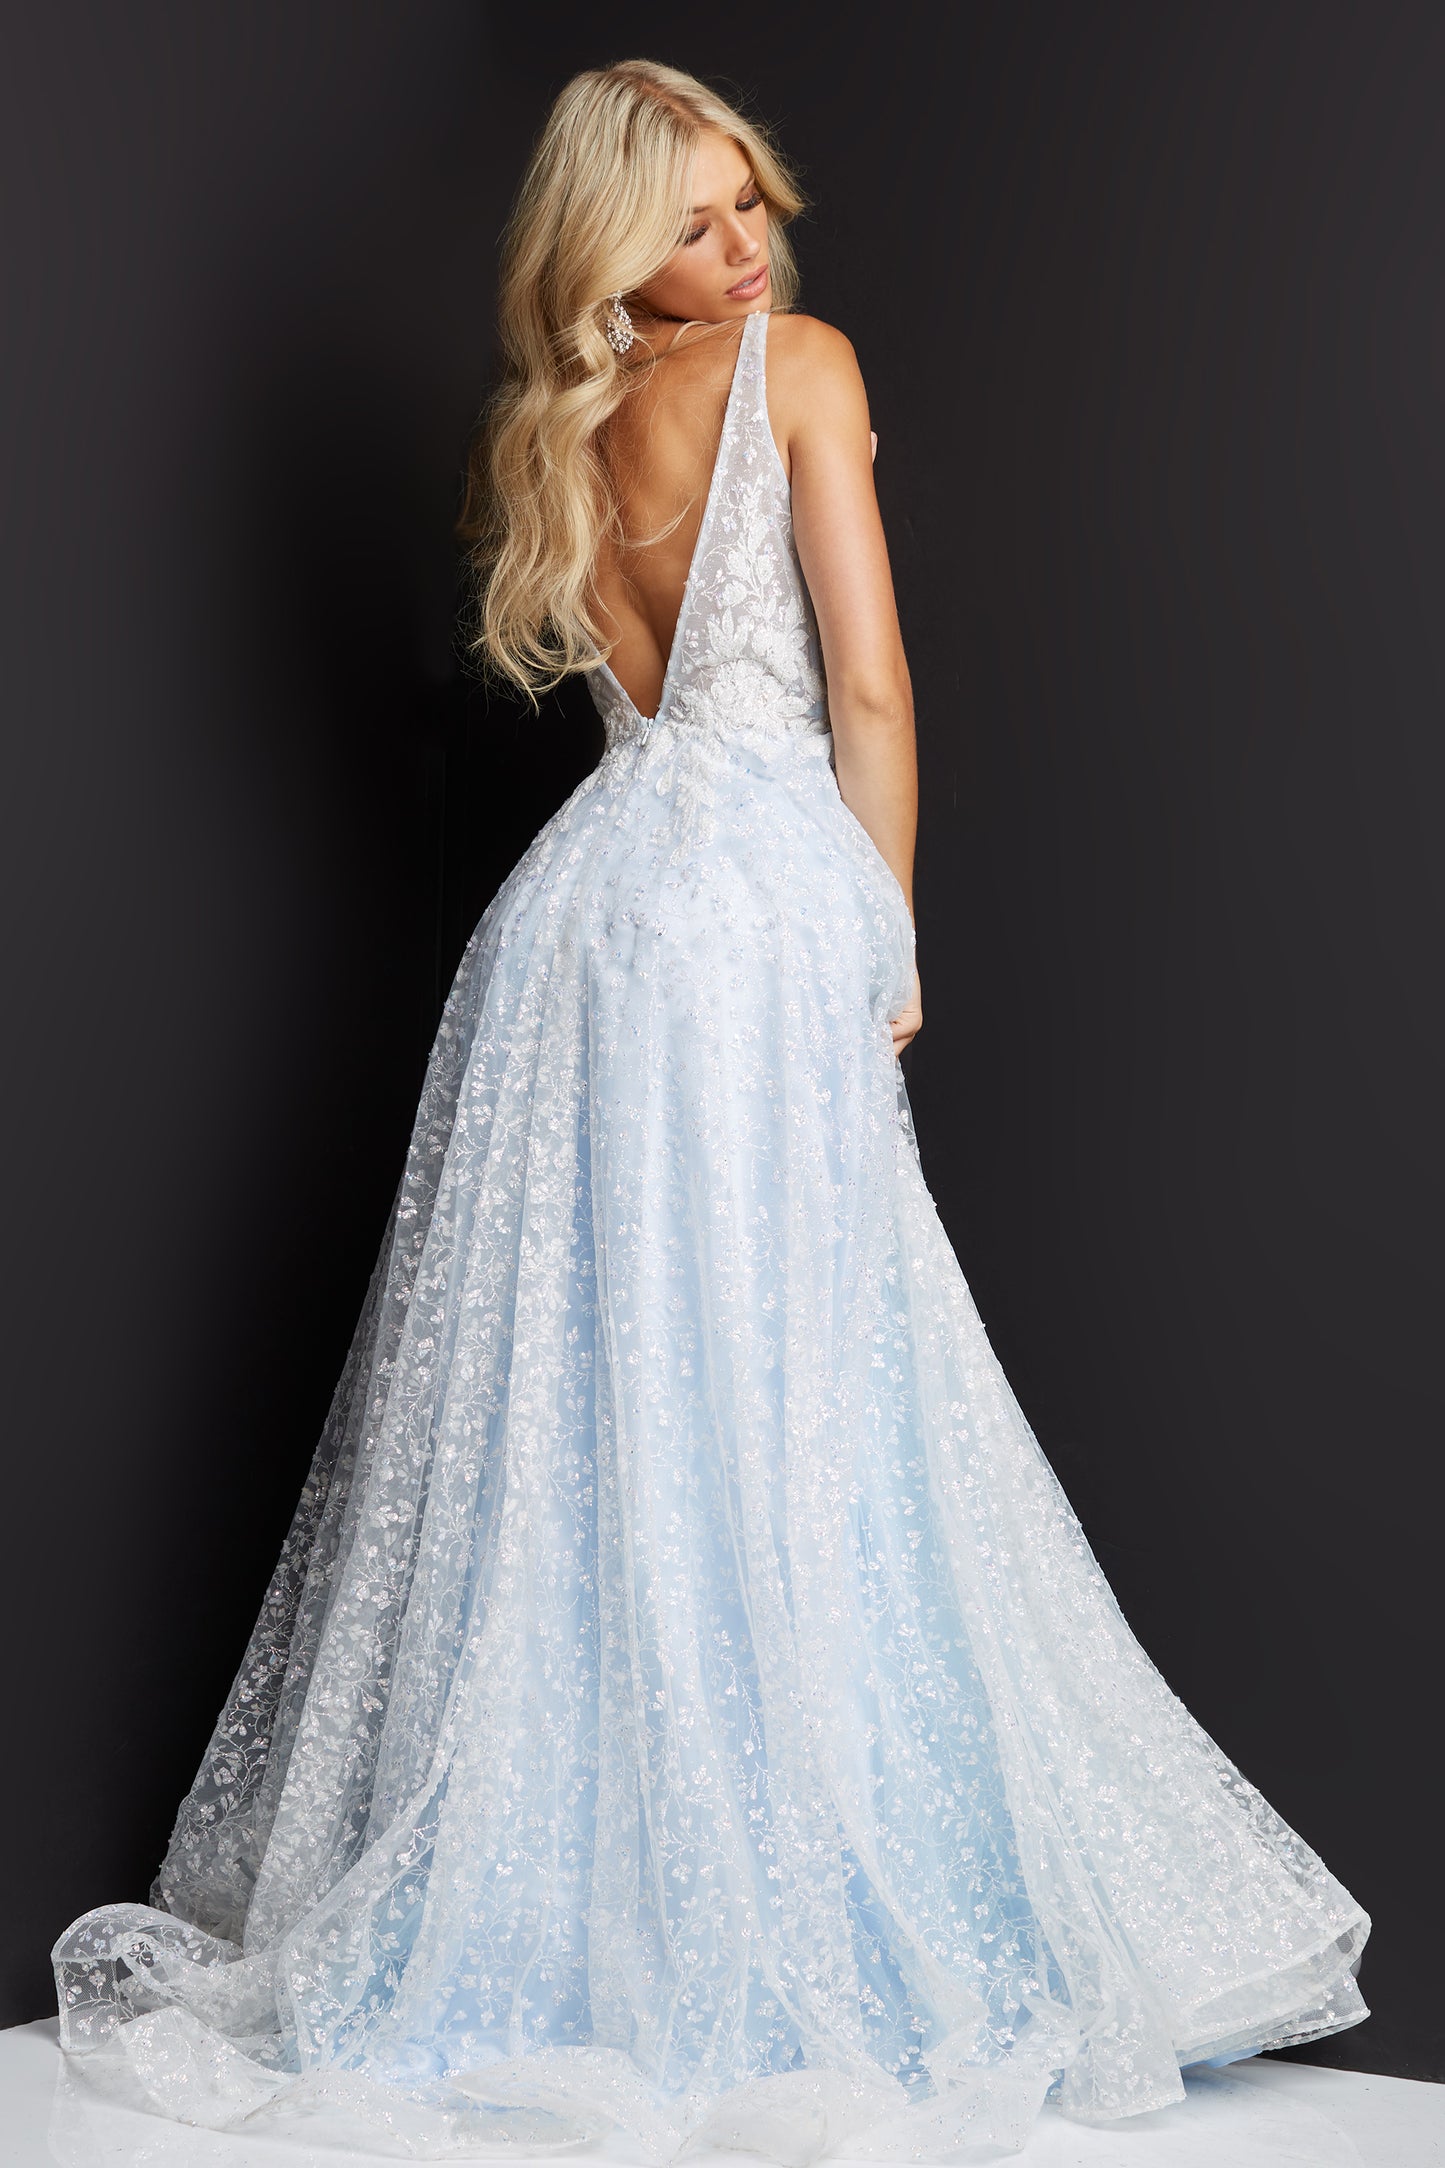 JVN08421 This JVN by Jovani prom dress is covered in floral lace with sequin embellishments to add sparkle.  The evening gown is an A line with a train and features a plunging V neckline with sheer mesh insert.  It has a low V back and a high side slit. 